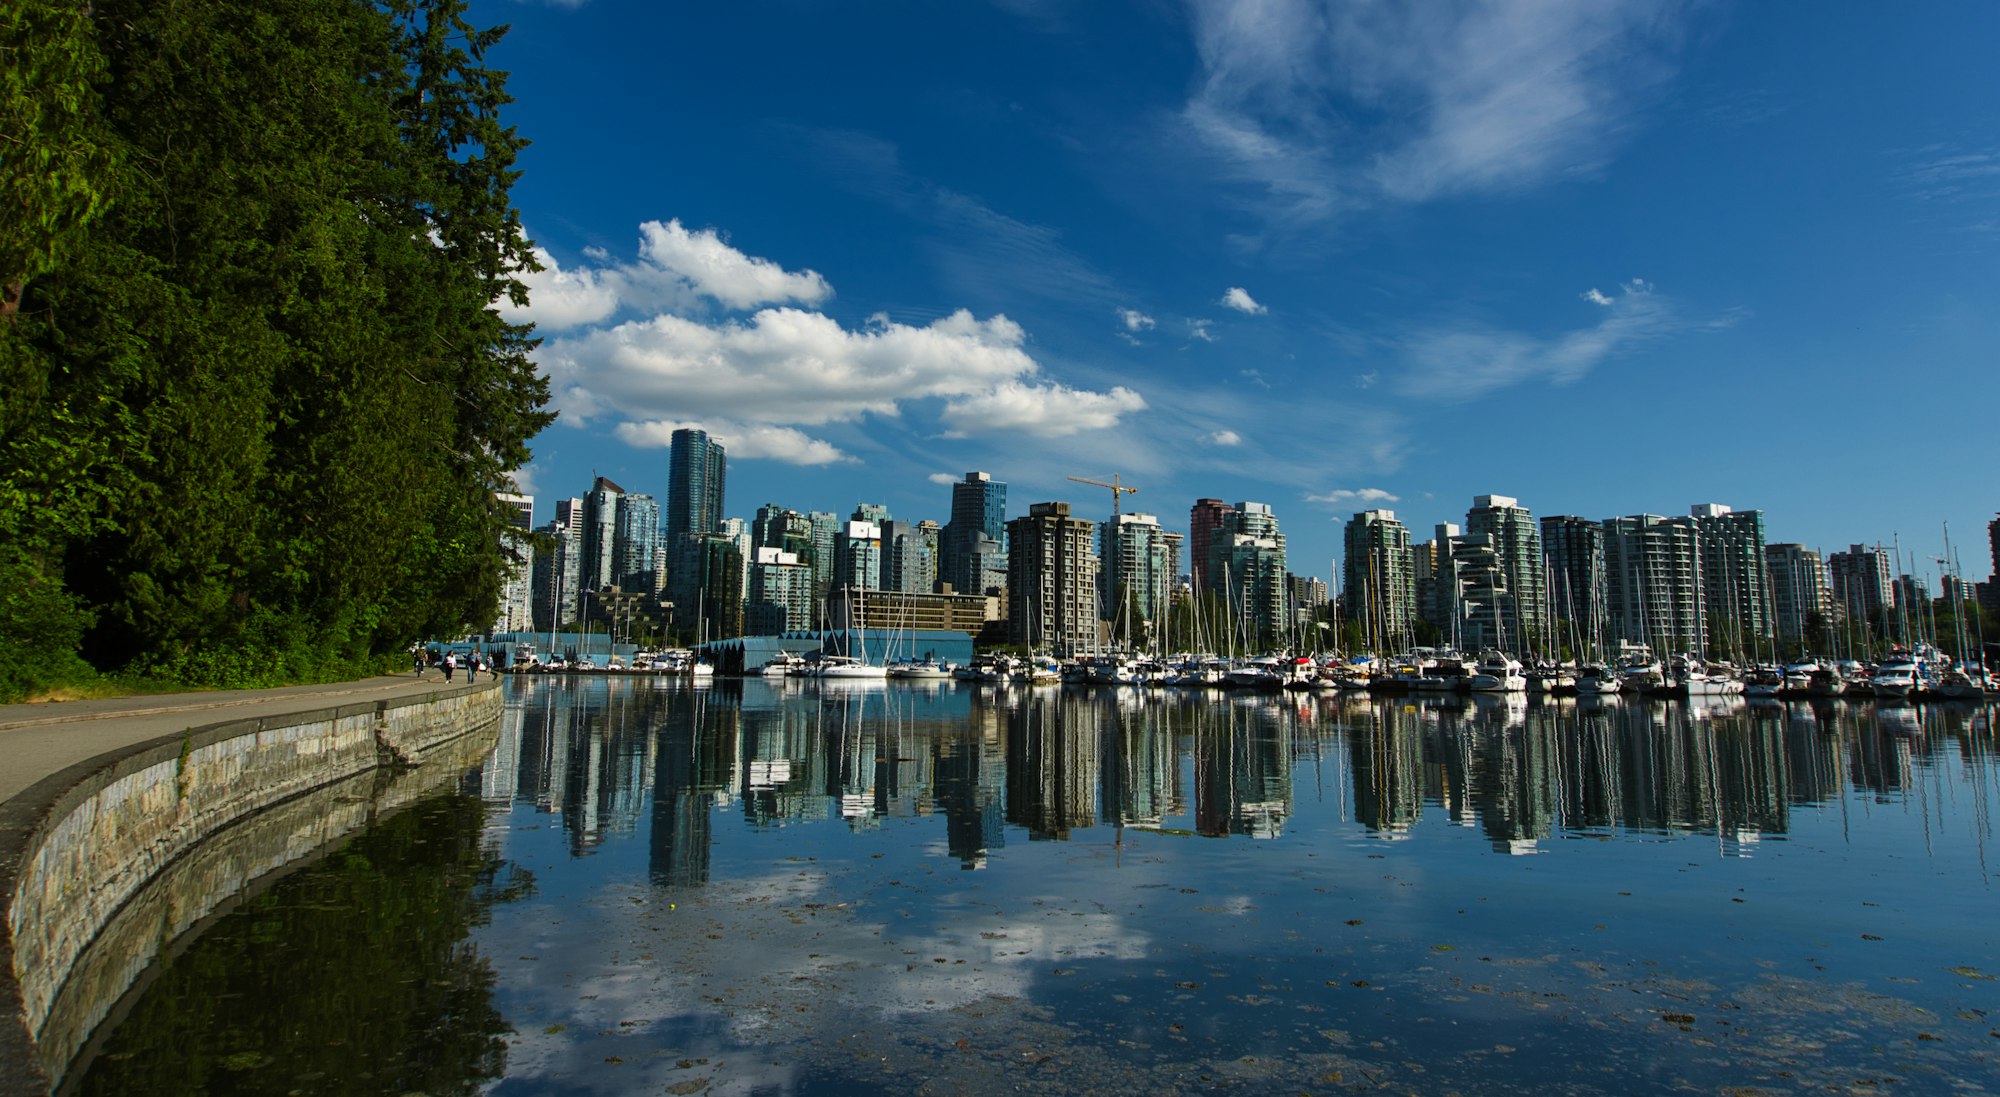 A view of some buildings from the Stanley Park Seawall